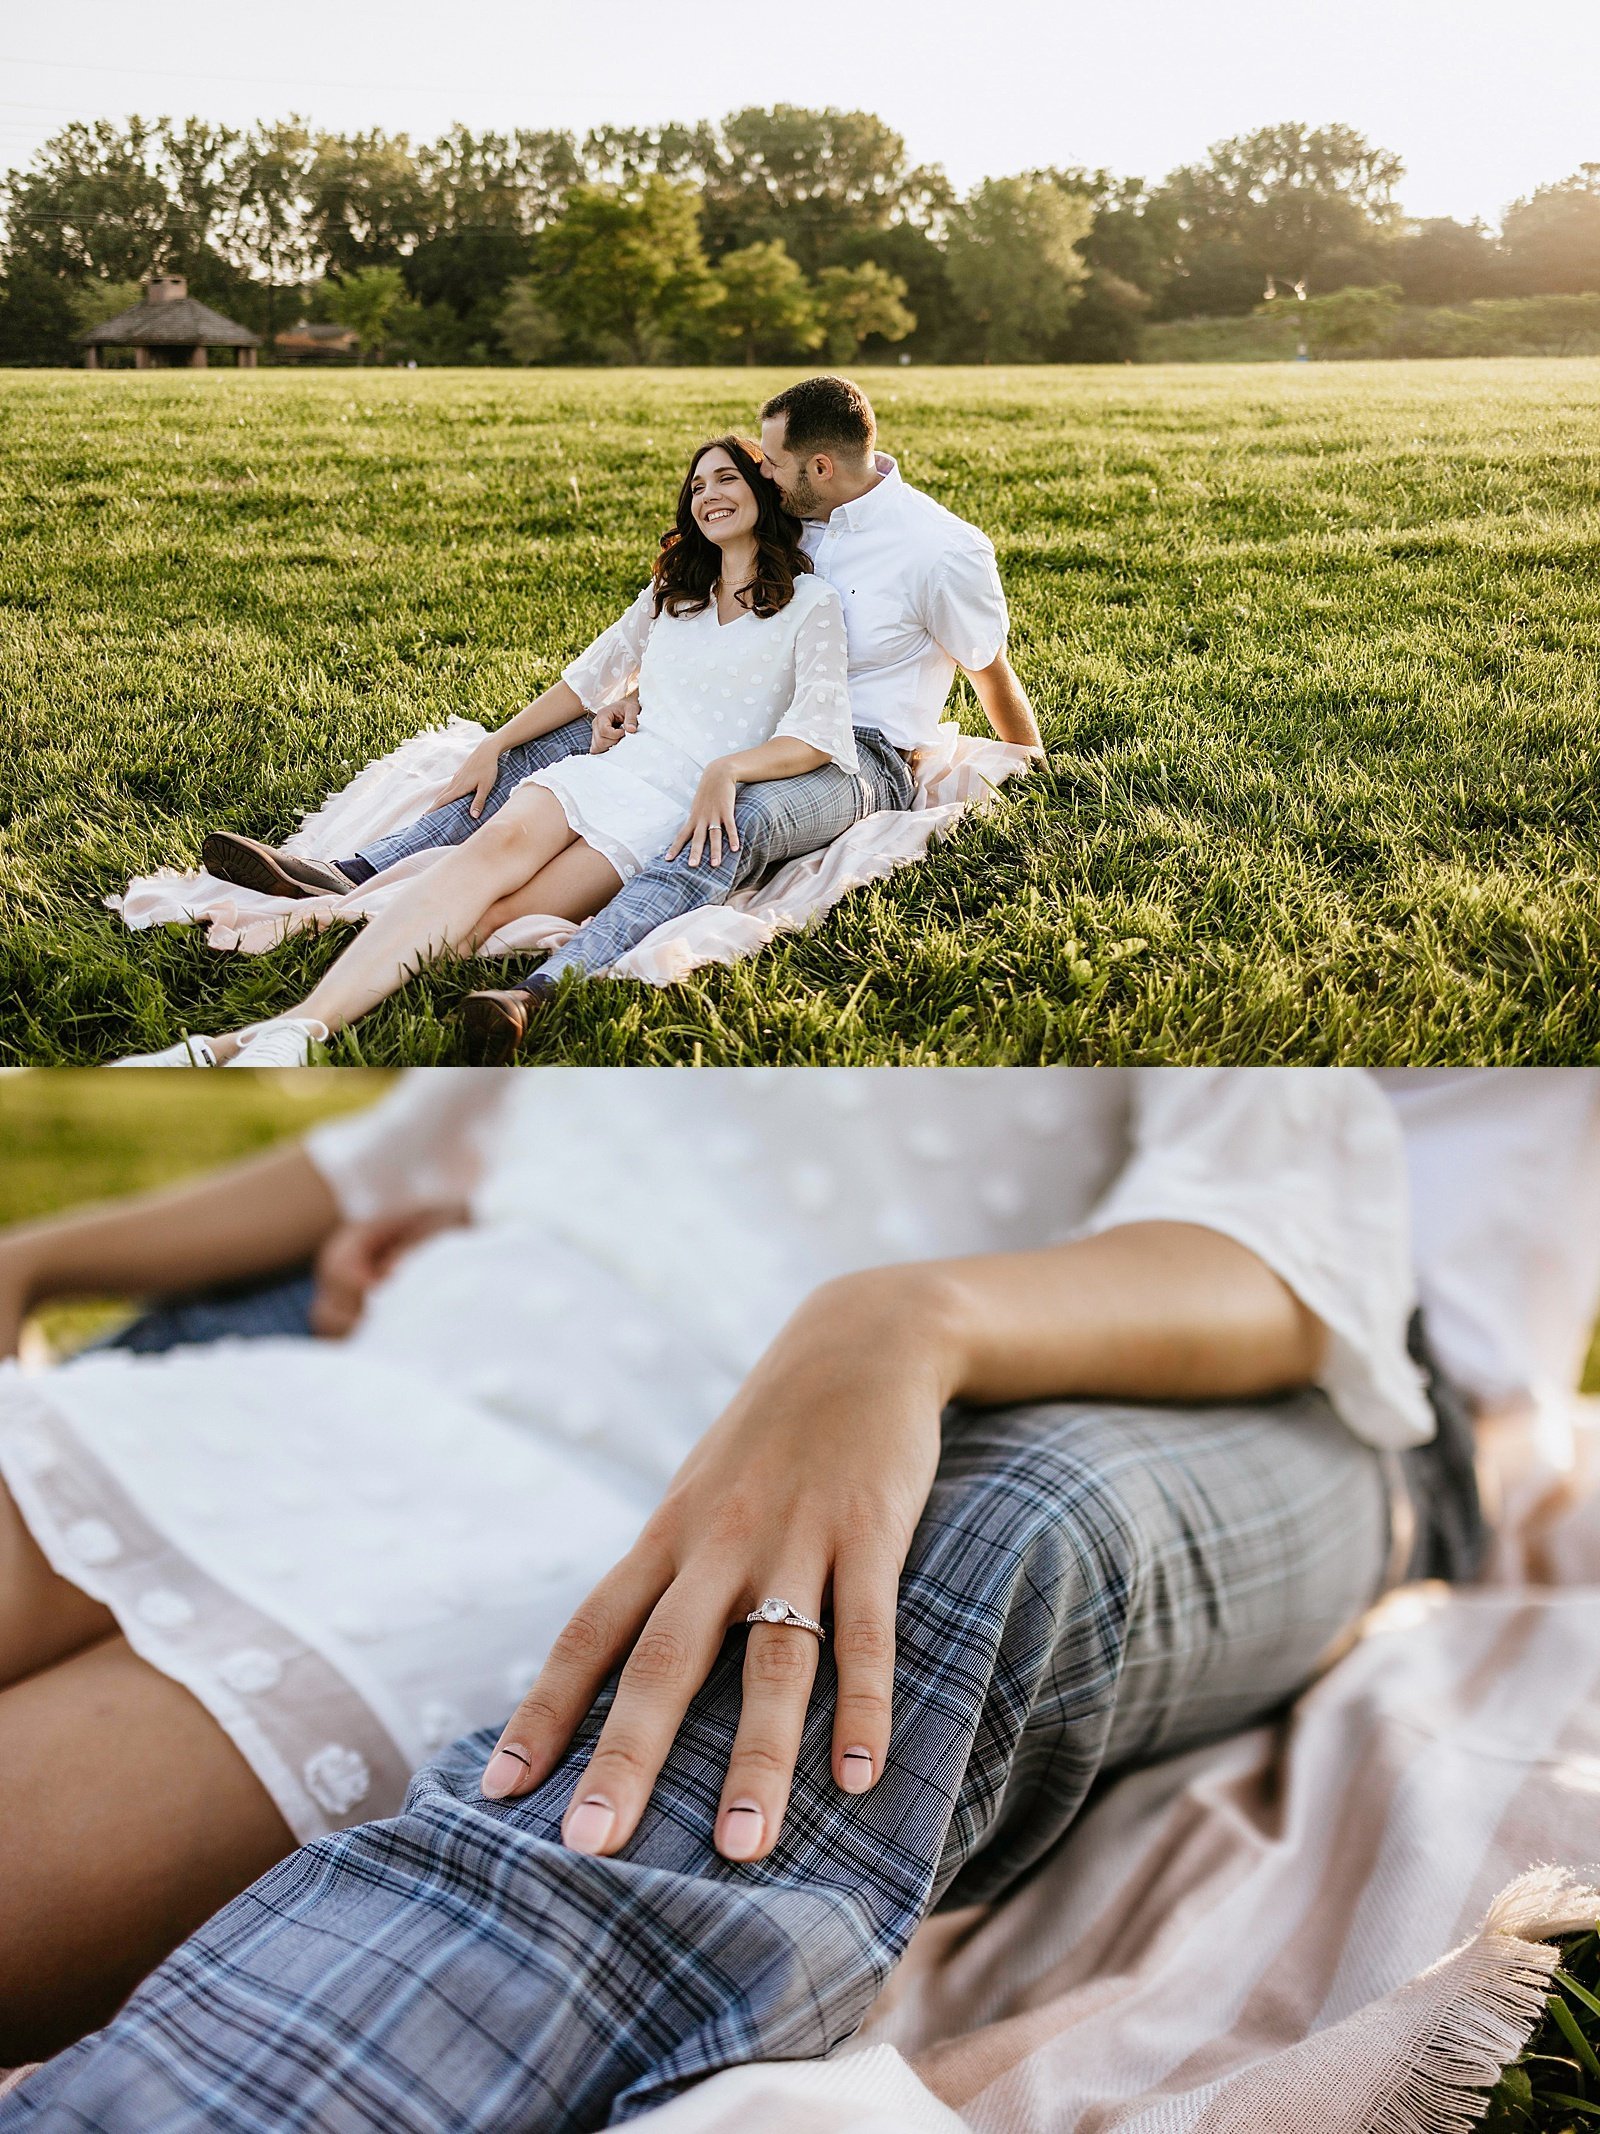  Woman lies her ringed finger on her fiancé’s knee during their sunrise engagement session in Minnesota.  